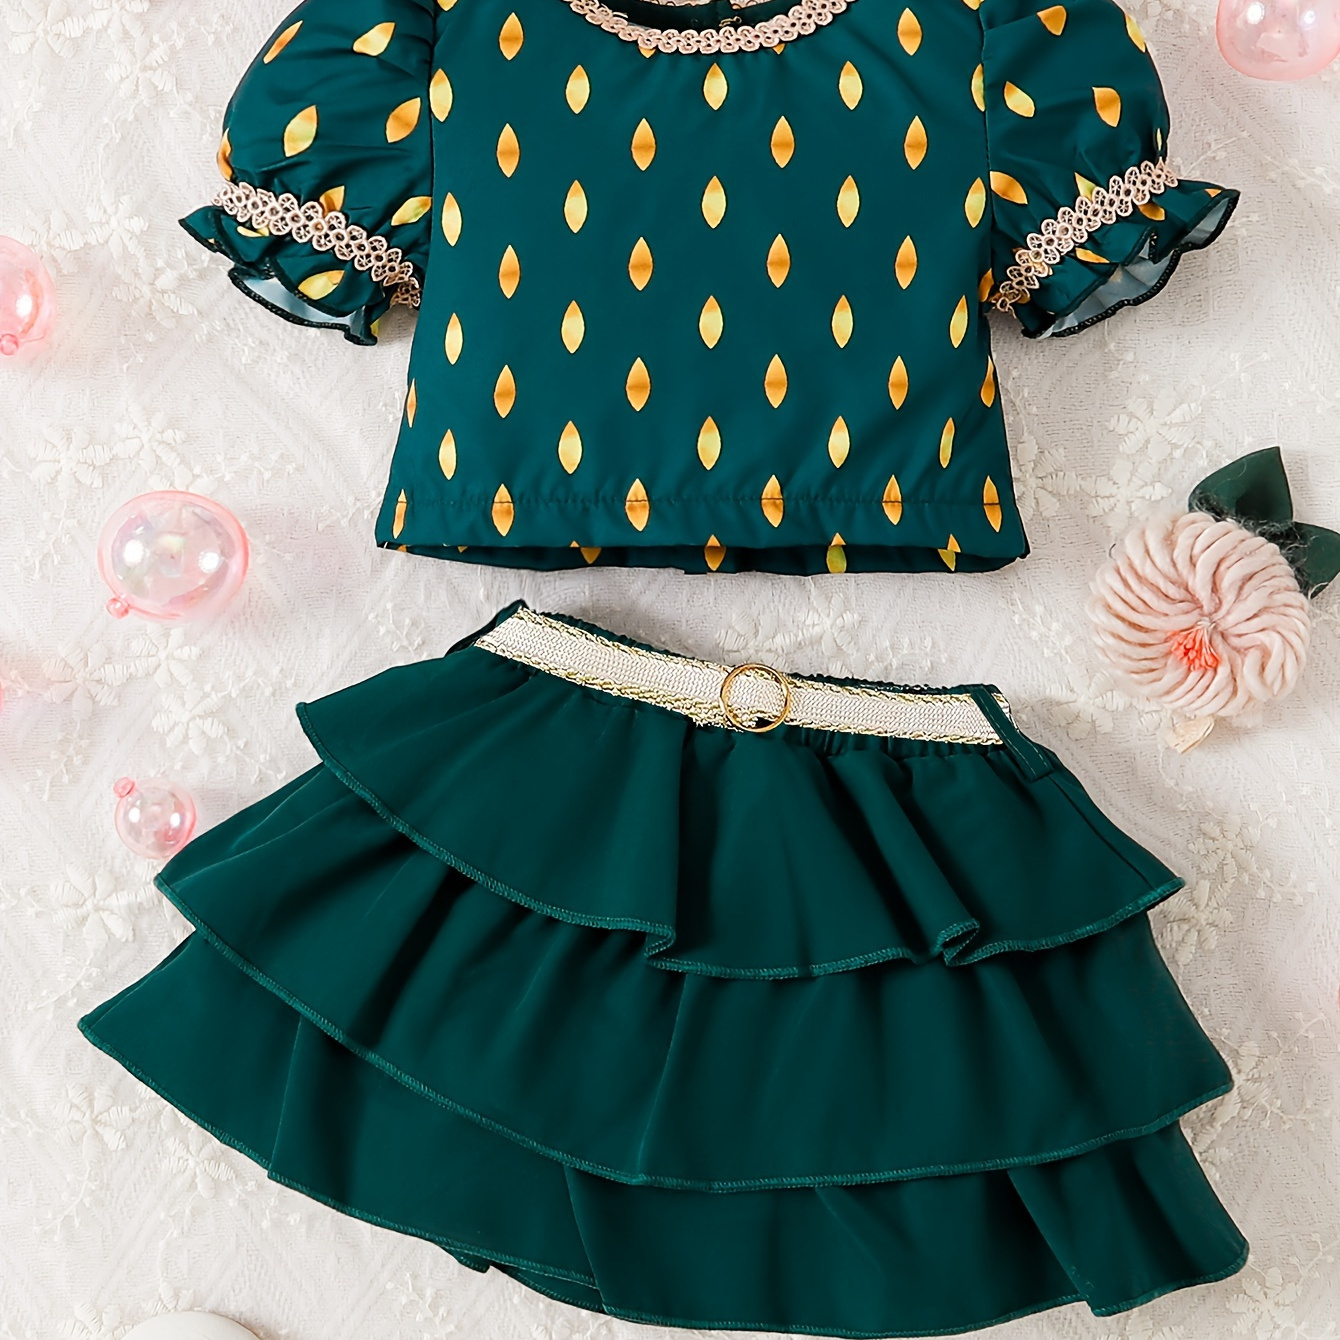 

Baby's Ethnic Style 2pcs Lovely Summer Outfit, Puff Sleeve Top & Layered Skirt Set, Toddler & Infant Girl's Clothes For Daily/holiday/party